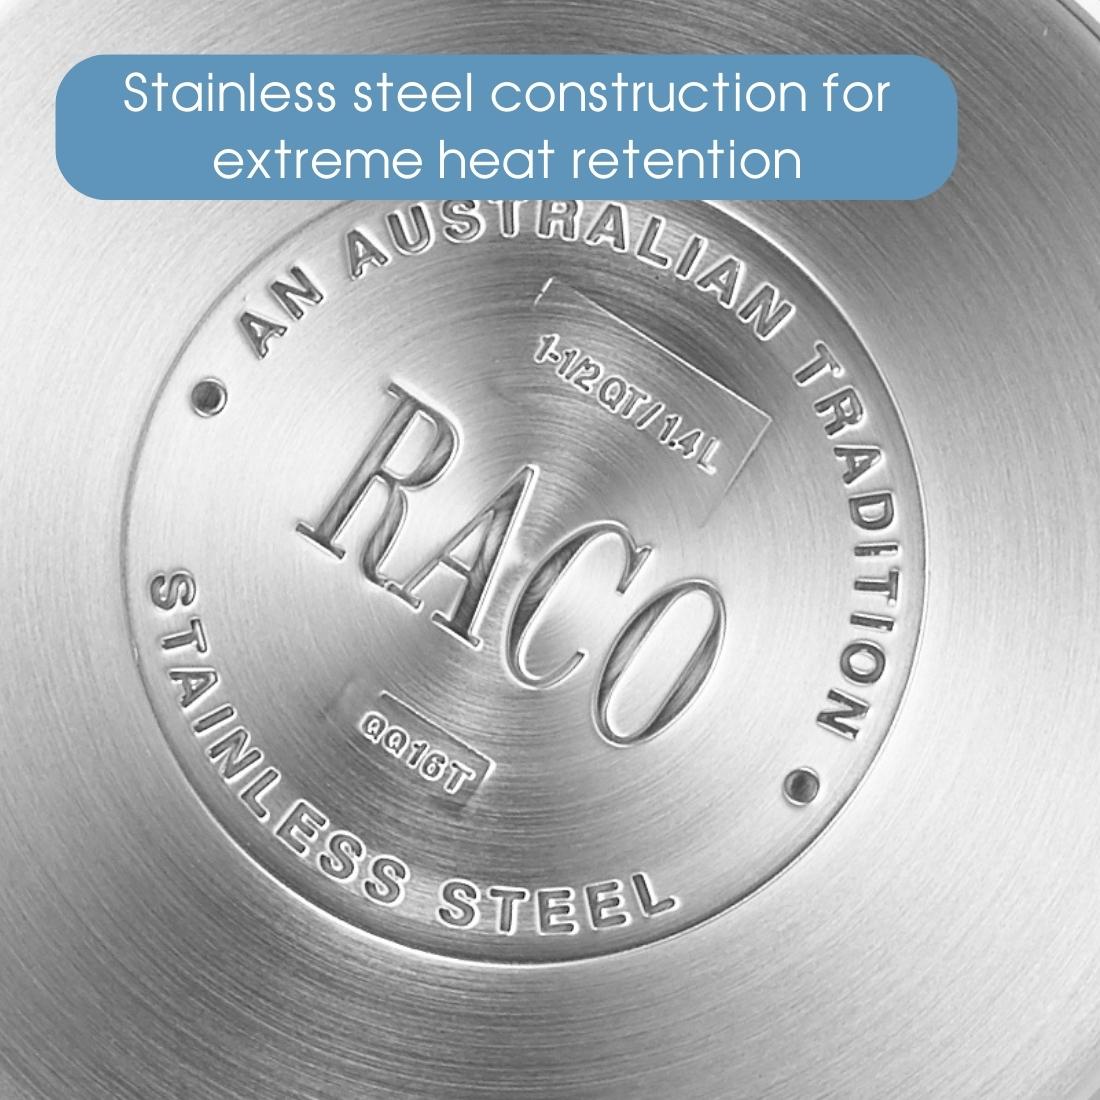 RACO Reliance Stainless Steel Induction Saucepan 16cm/1.4L